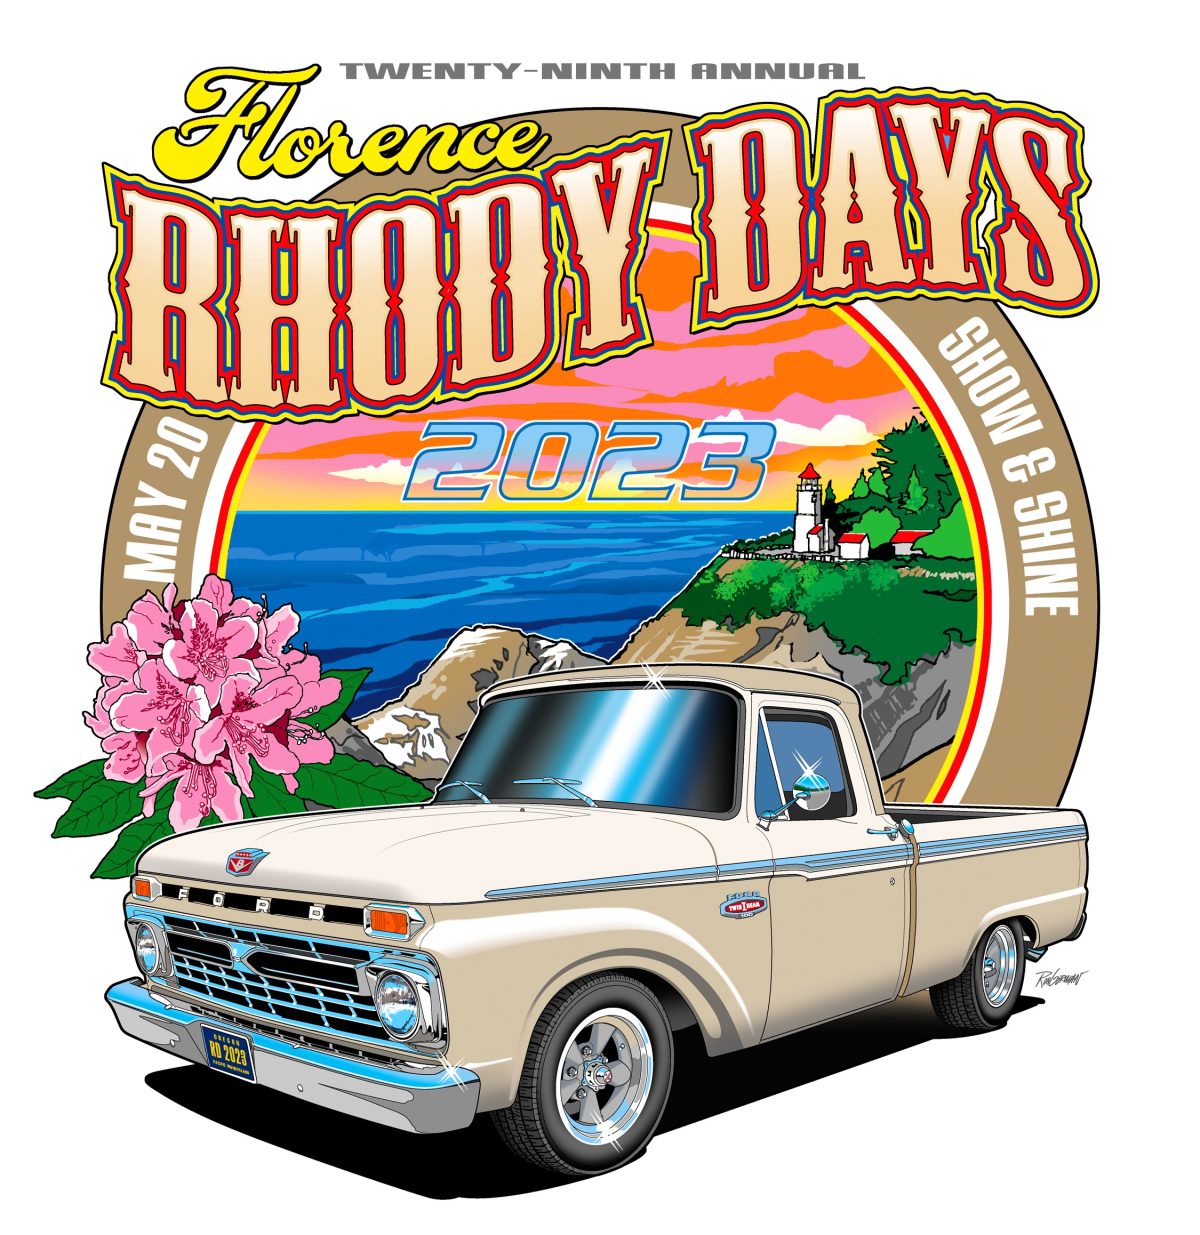 29th Annual Rods Days Show ‘N Shine